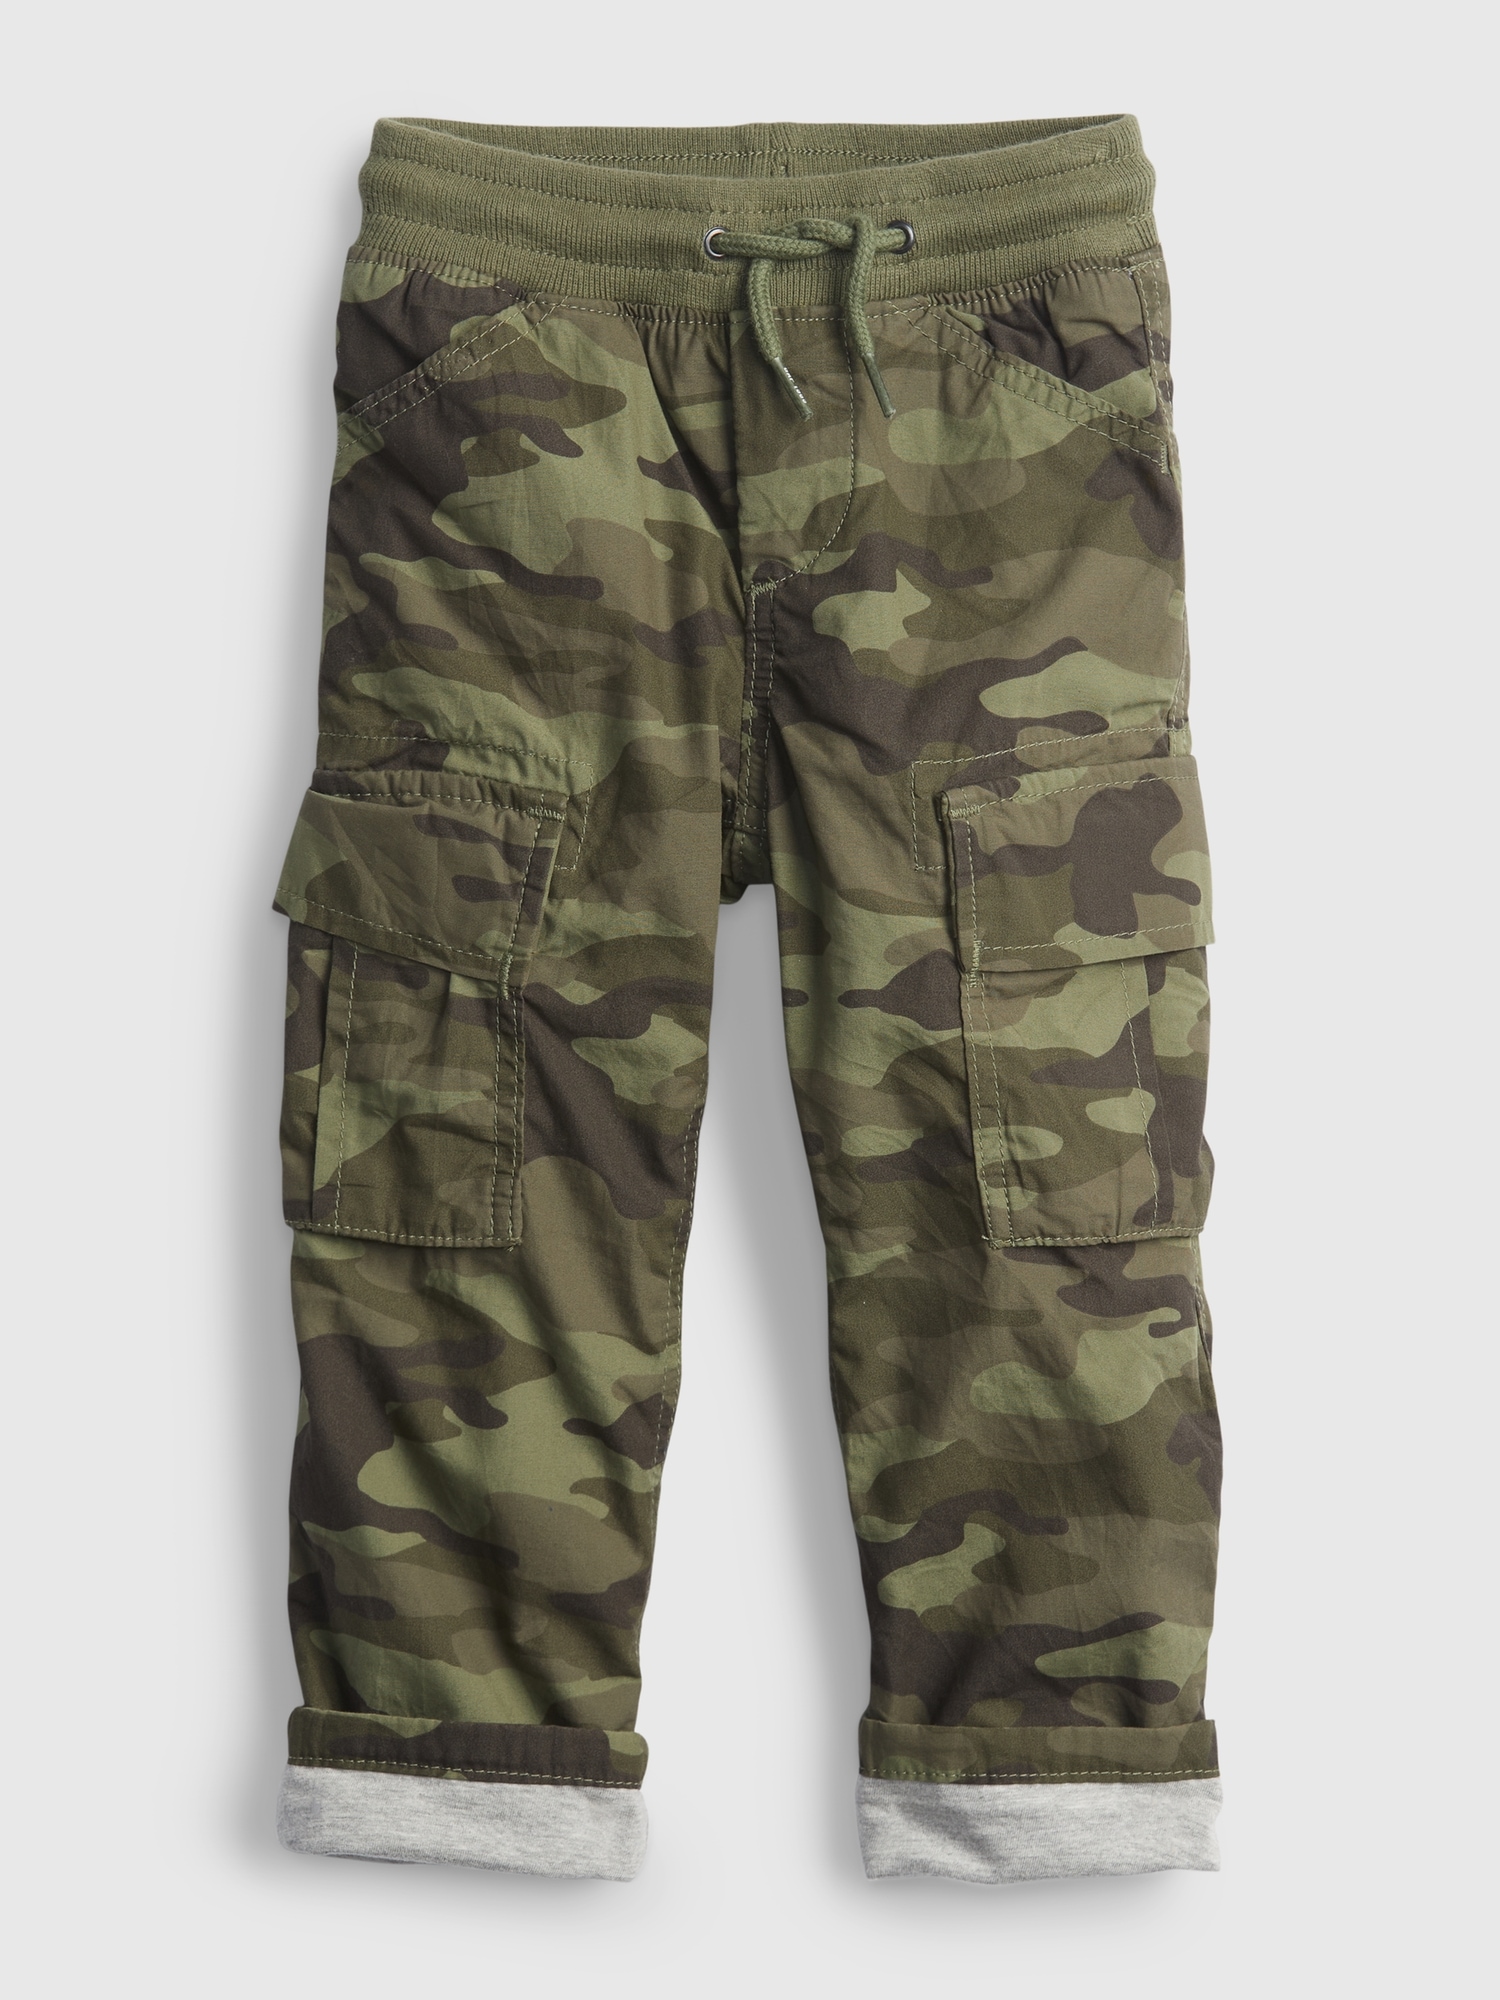 Toddler Lined Pull-On Cargo Pants with Washwell ™ | Gap